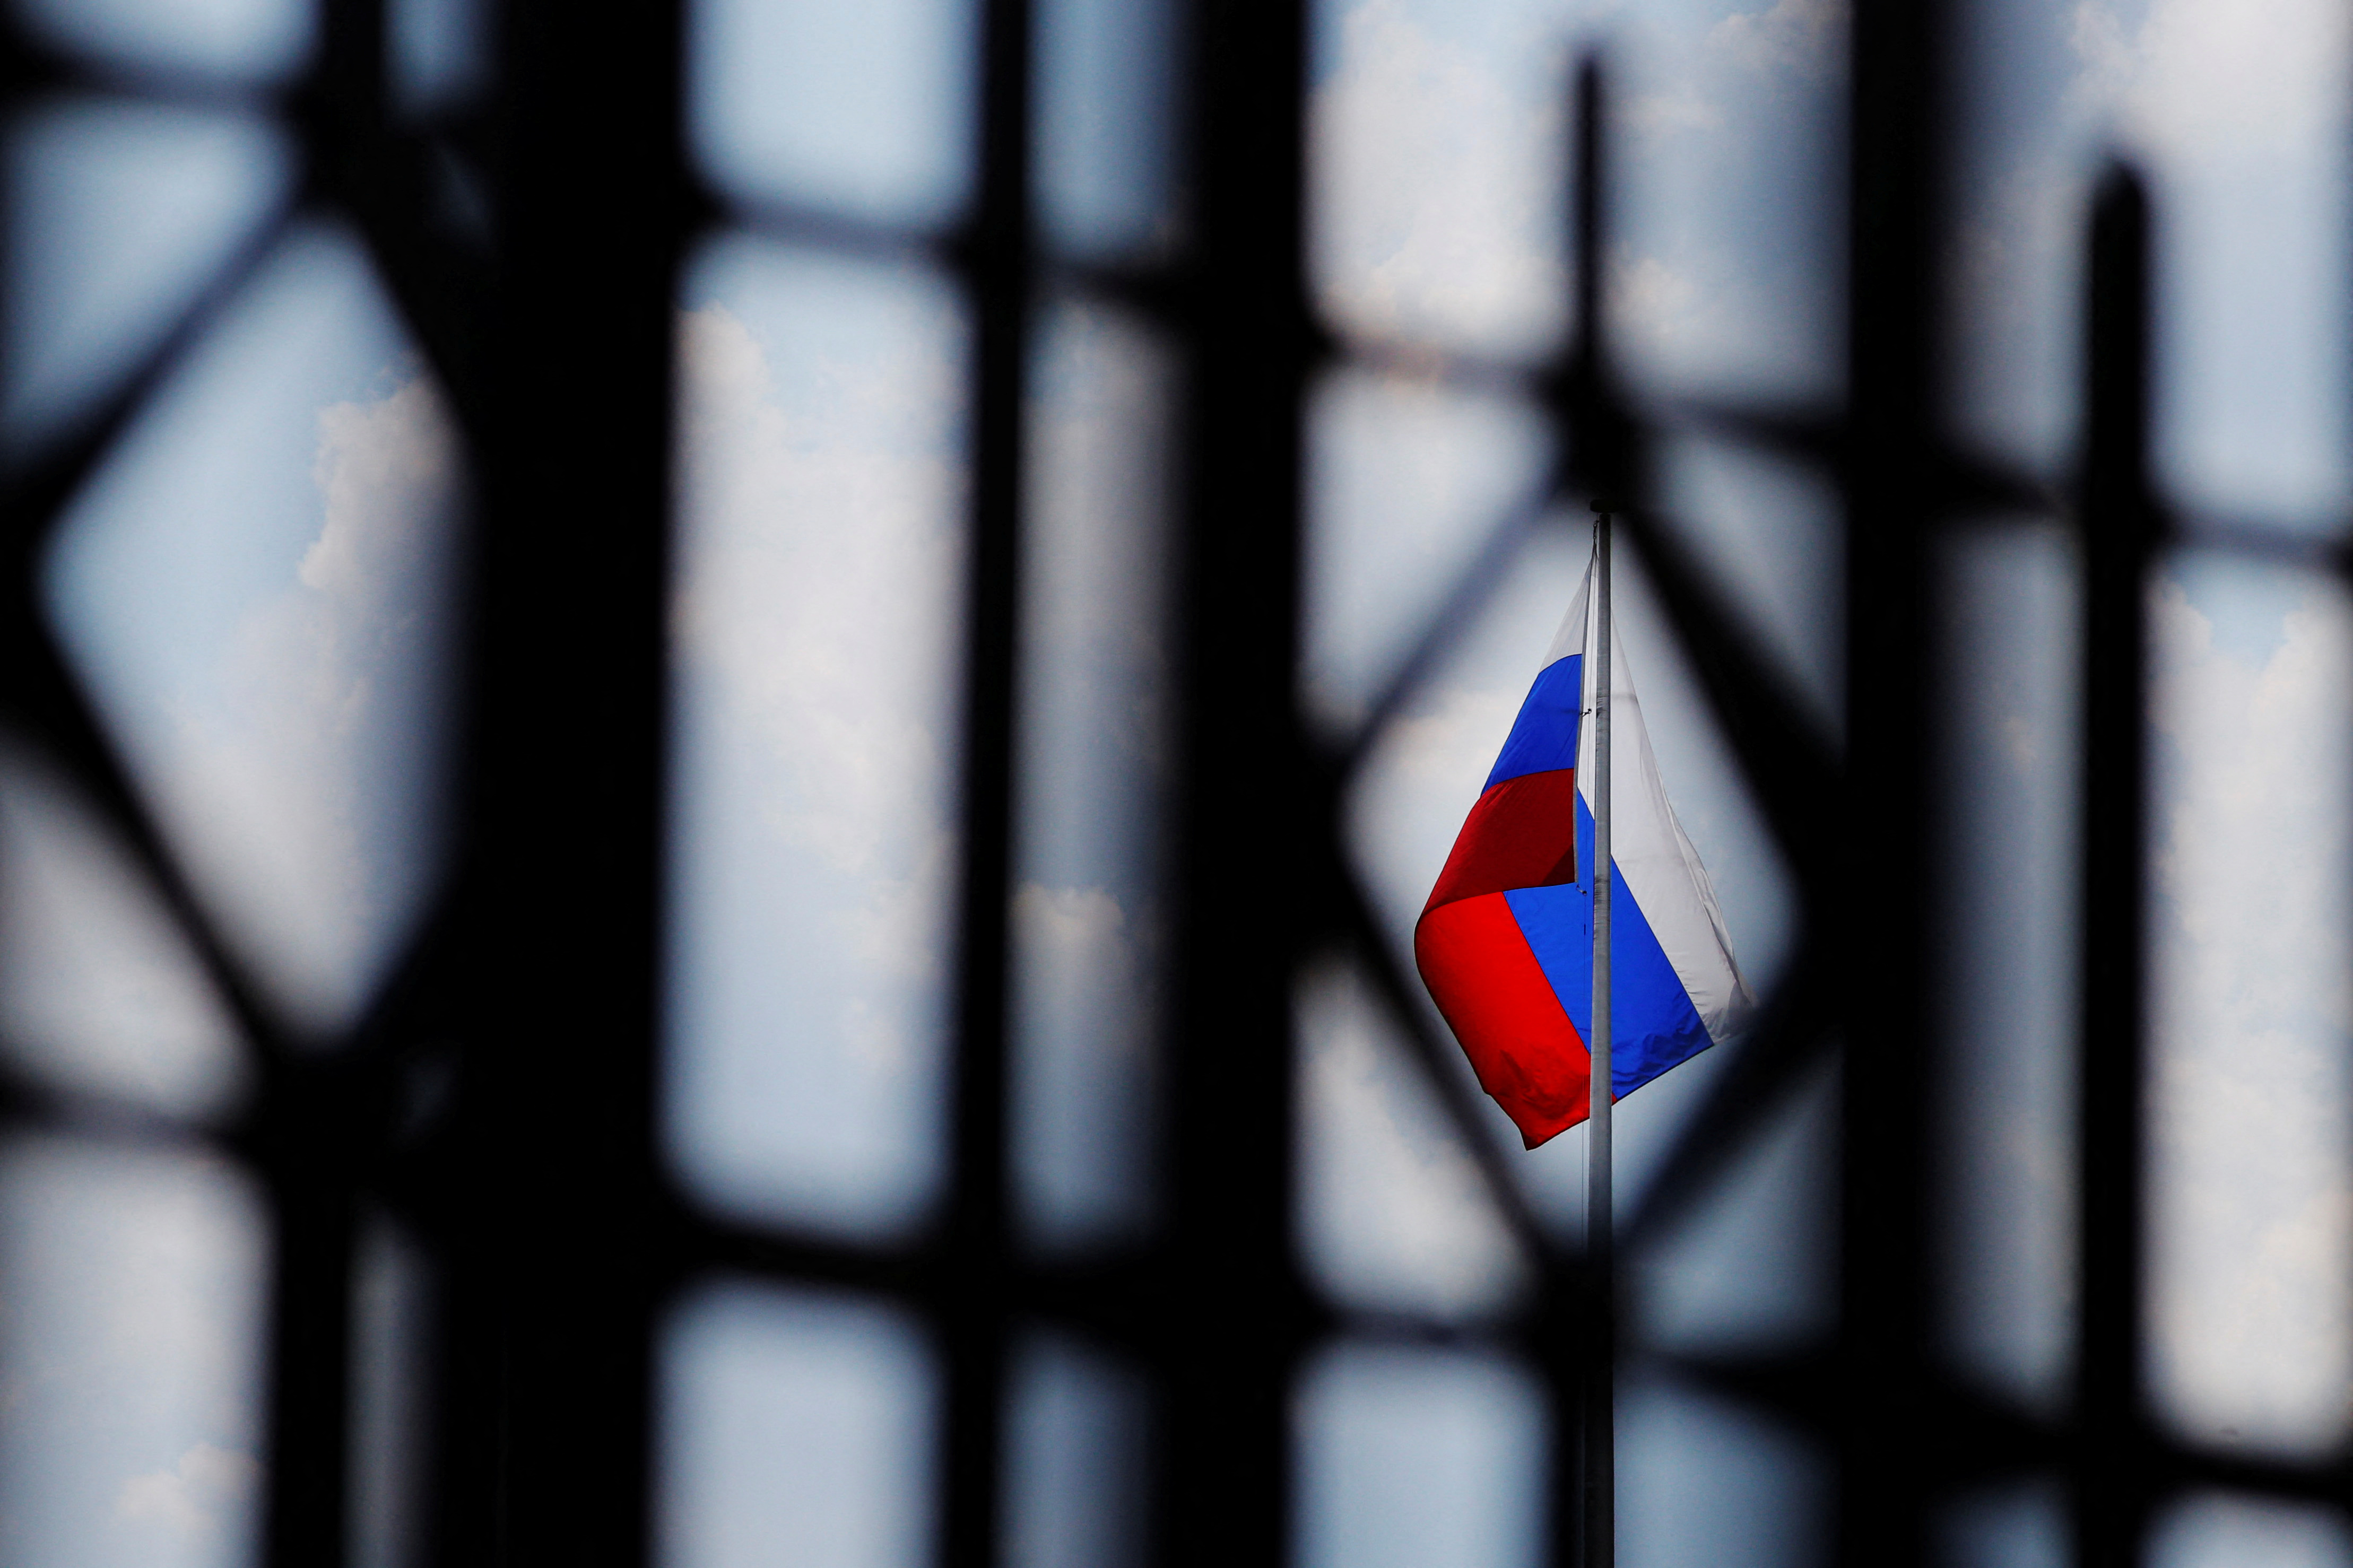 The Russian flag flies over the Embassy of Russia in Washington